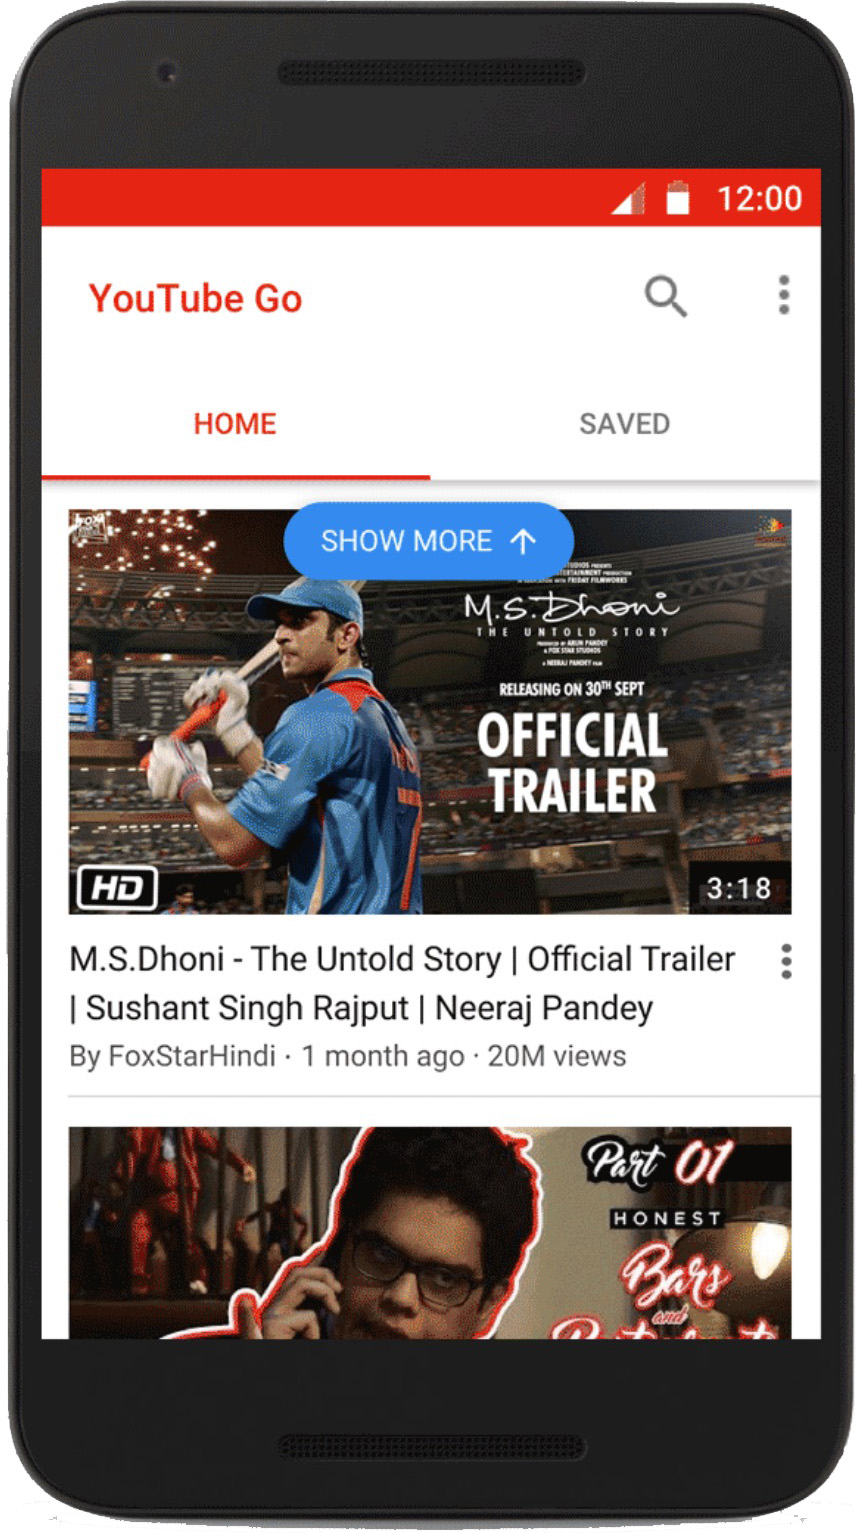 New &#039;YouTube Go&#039; App Will Let You Save and Watch Videos Offline